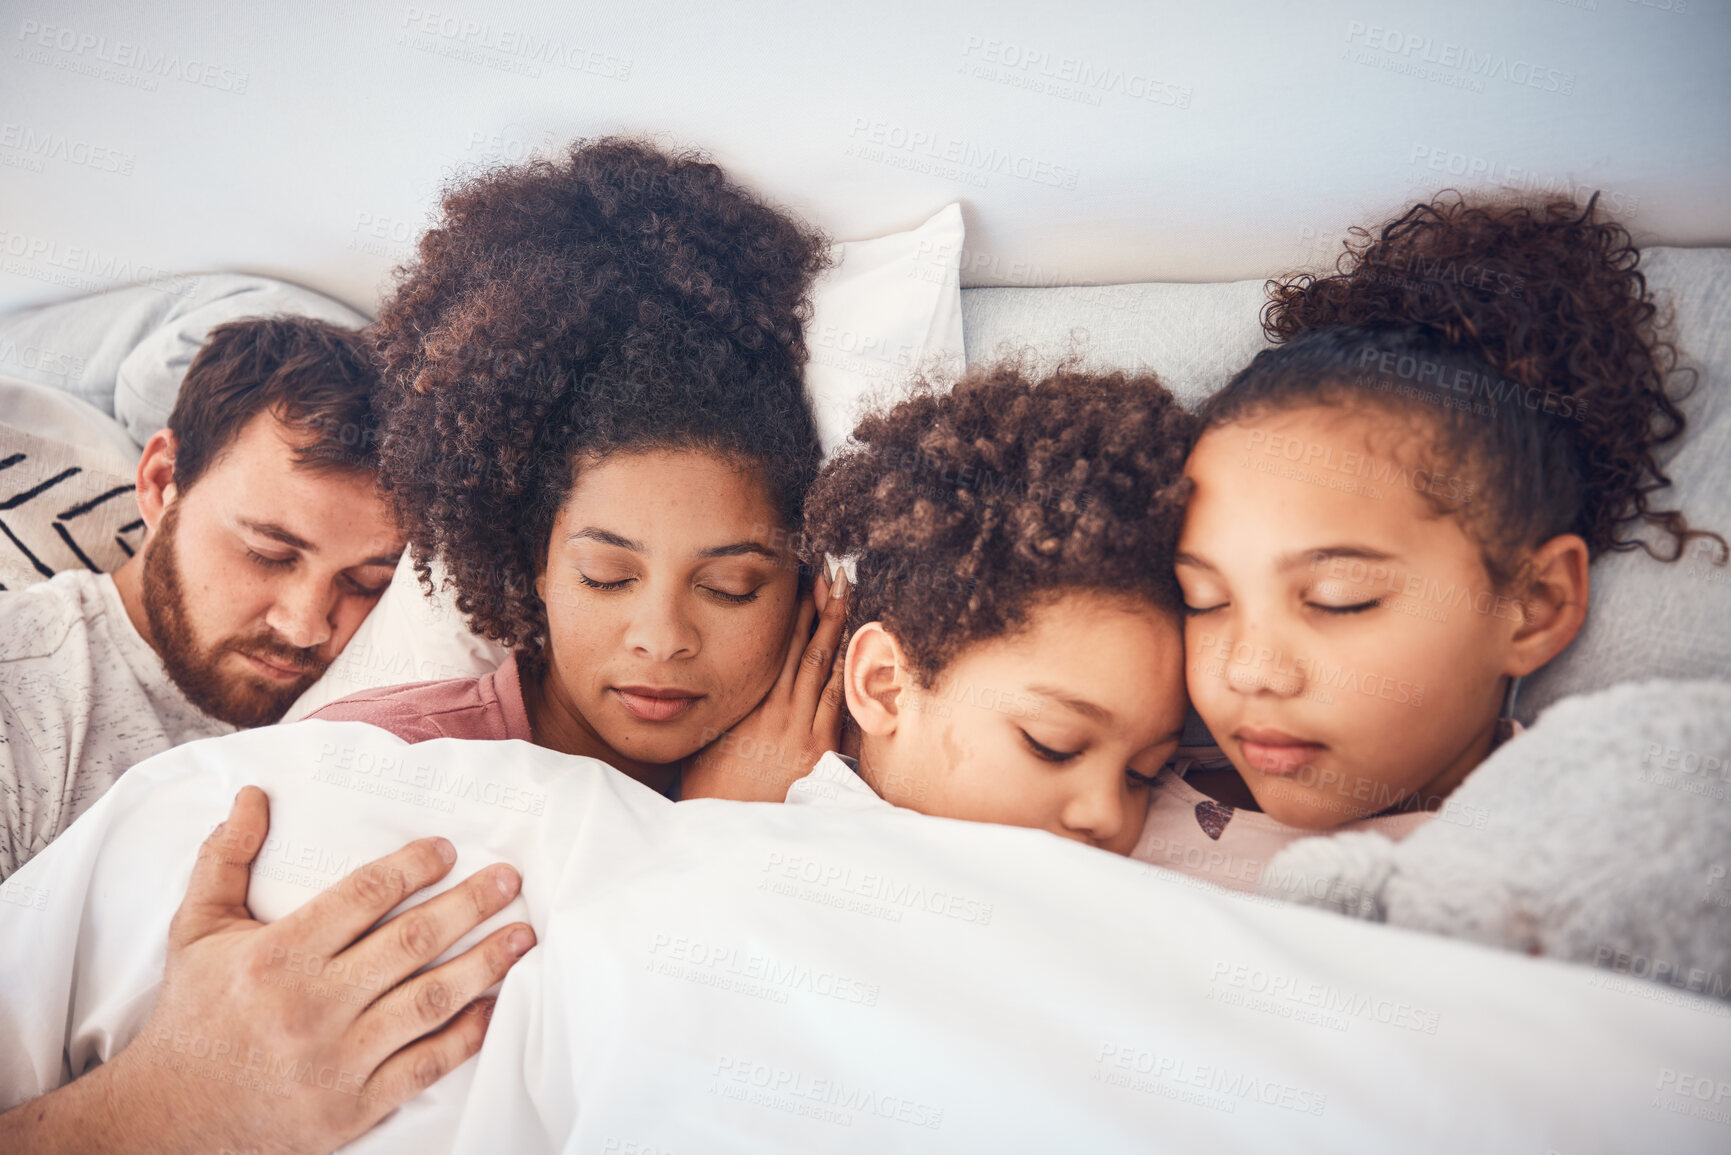 Buy stock photo Family, sleeping and together in bed at home for security, bonding and comfort. Healthy, mixed race and a man, woman and children nap, dream and rest or relax in a bedroom with love, care and peace